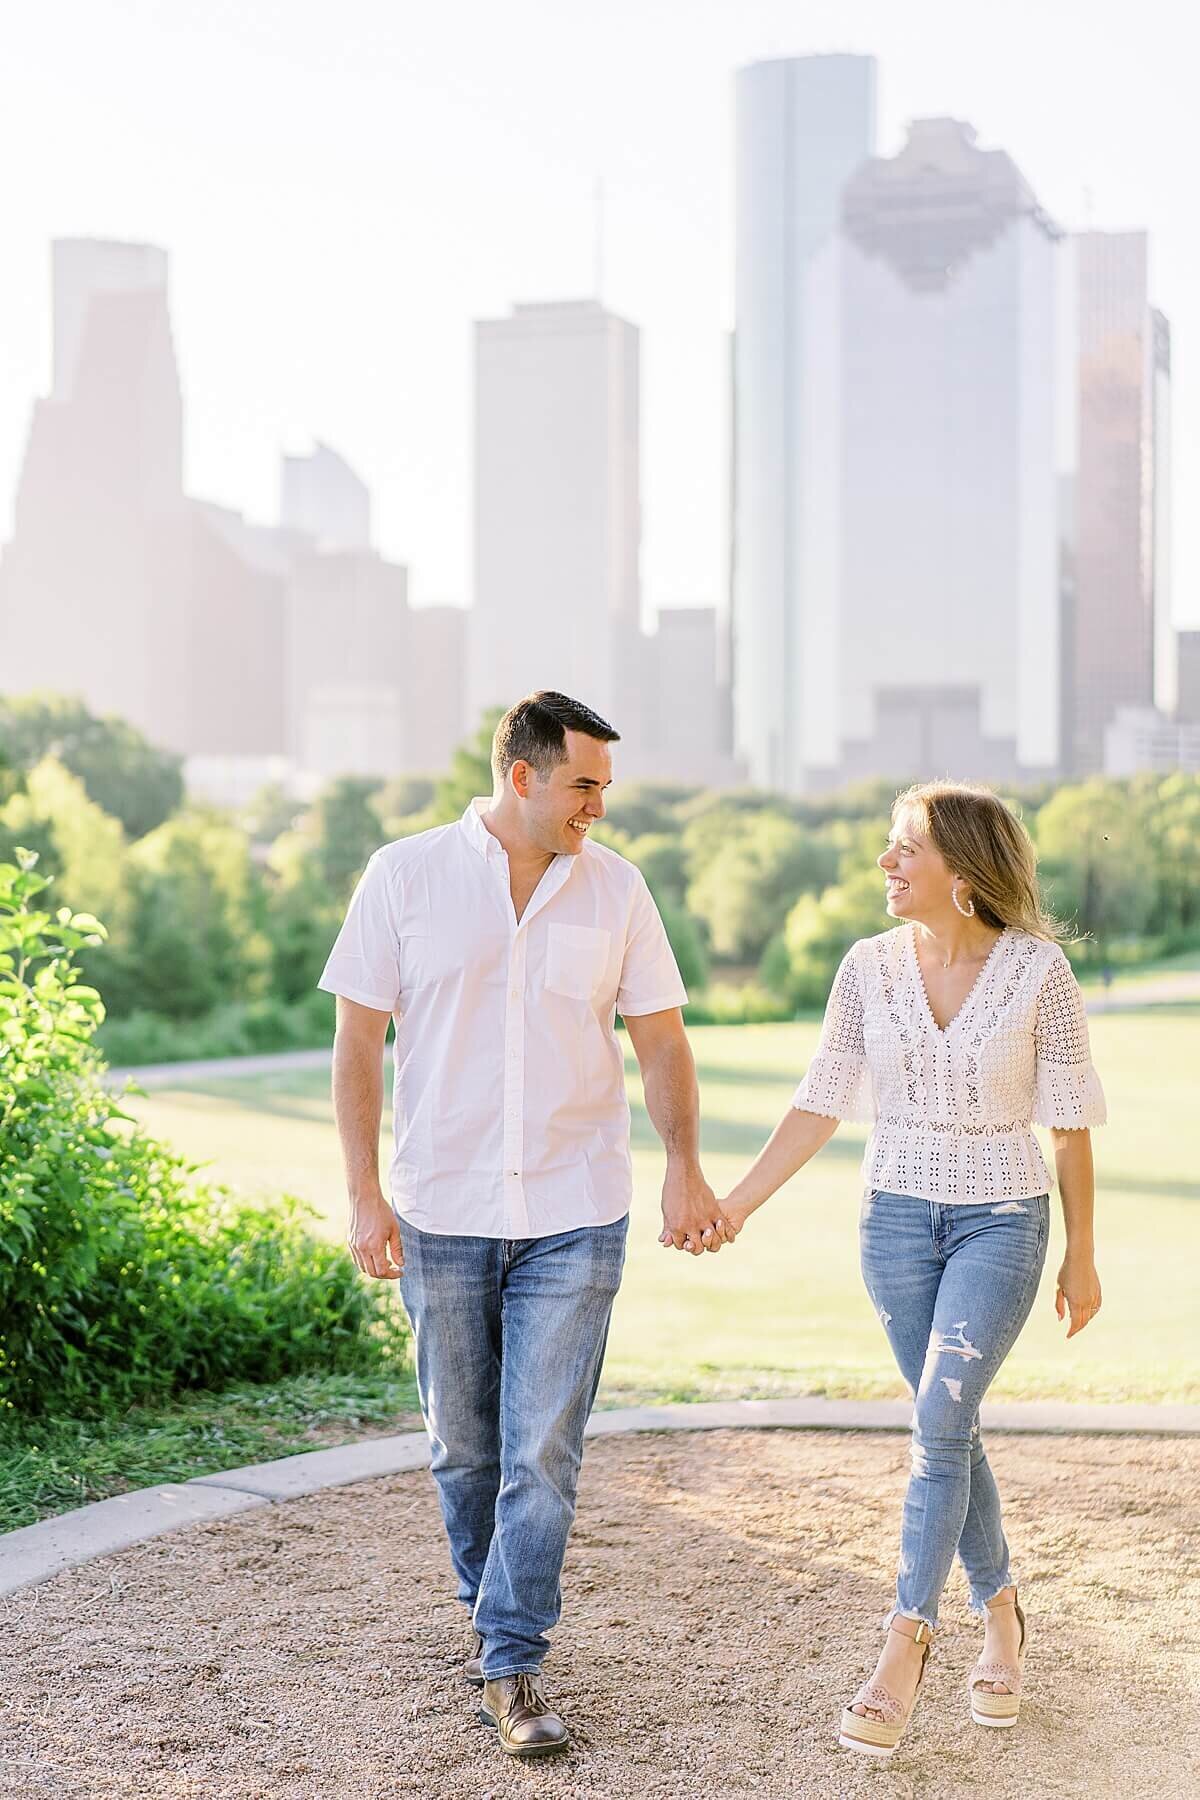 McGovern-Centennial-Gardens-Hermann-Park-Engagement-Session-Alicia-Yarrish-Photography_0002